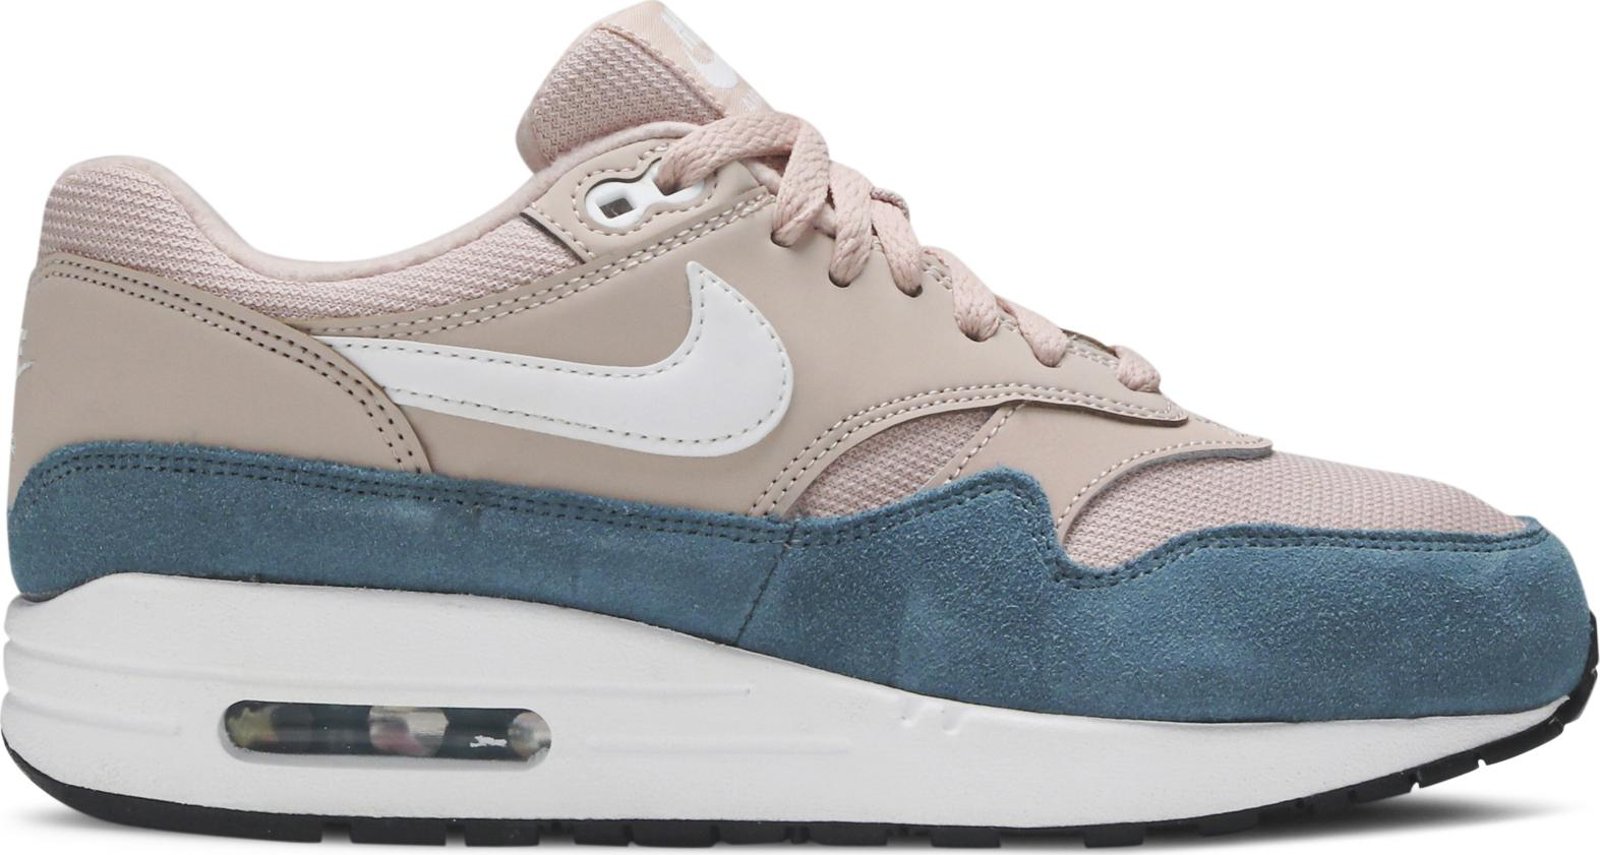 Buy Wmns Air Max 1 'Celestial Teal' - 319986 405 | GOAT